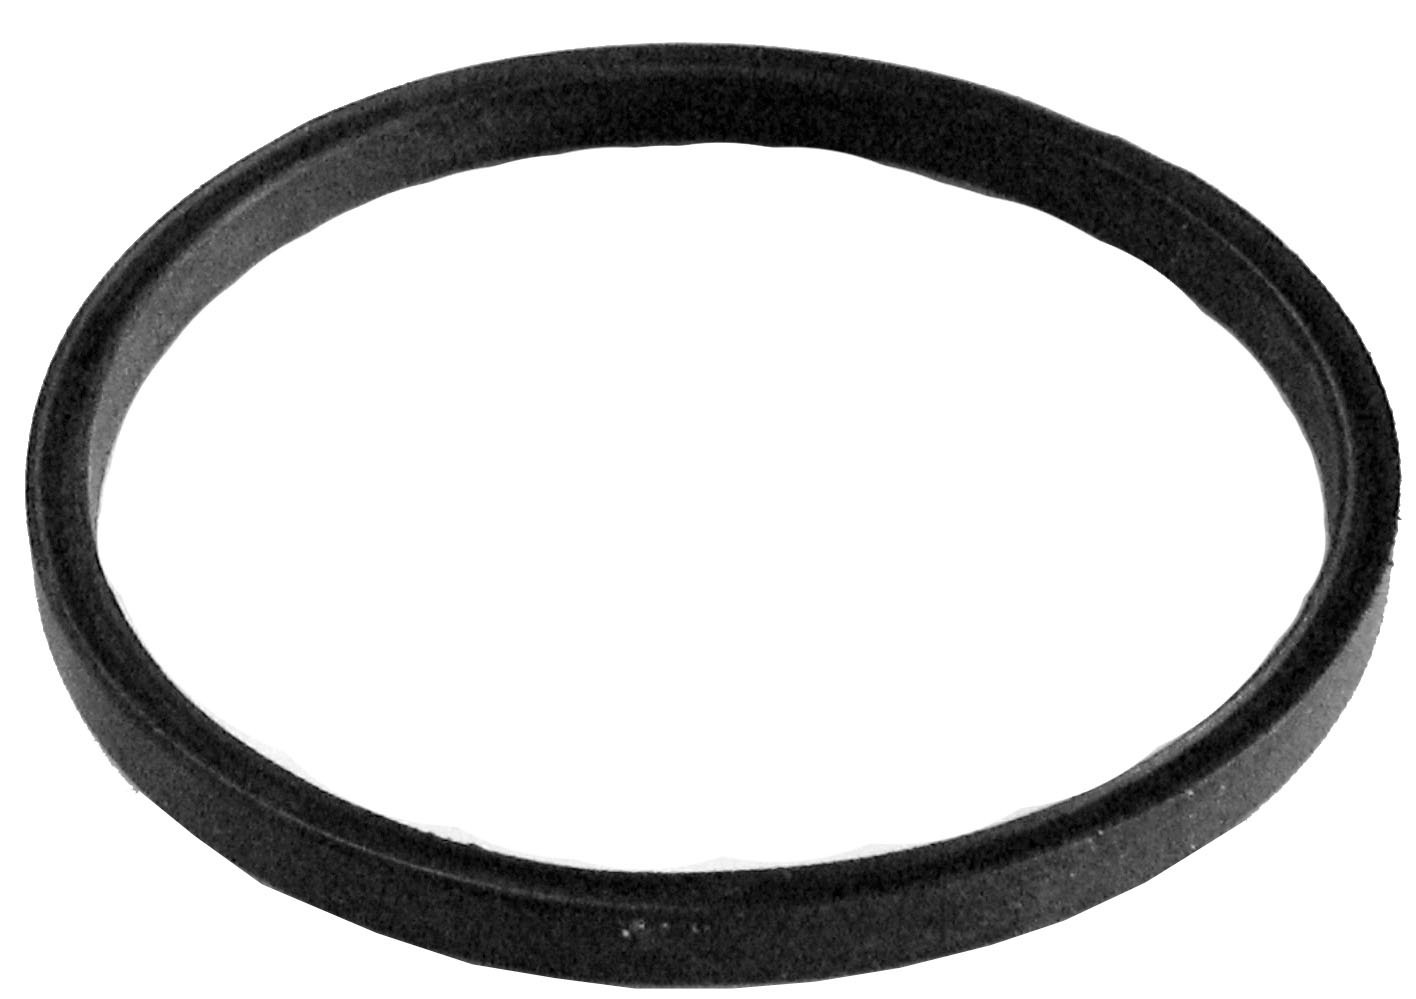 Replacement gasket for DV300 sensor cover